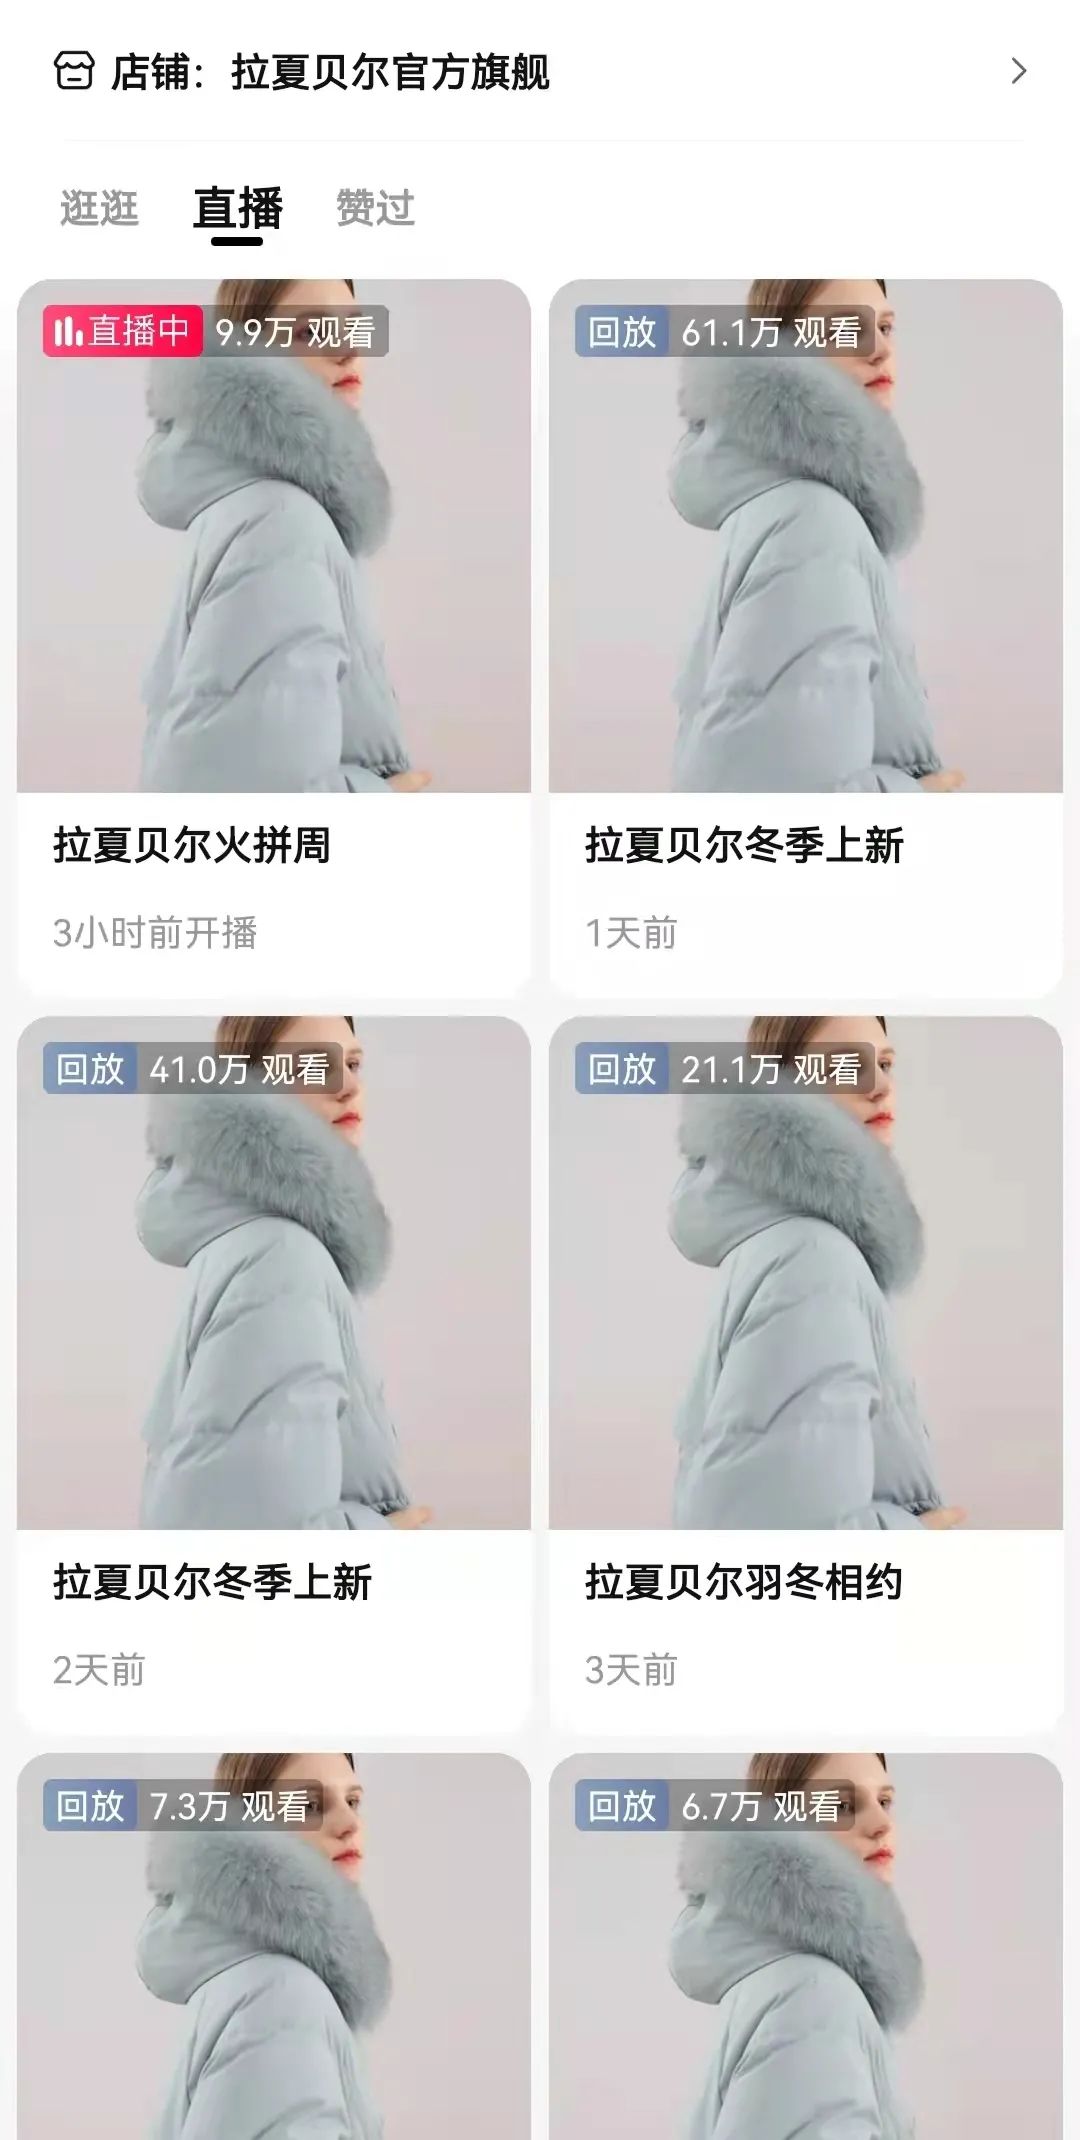 Screenshot of the live broadcast room of La Chapelle's official flagship store on Tmall.